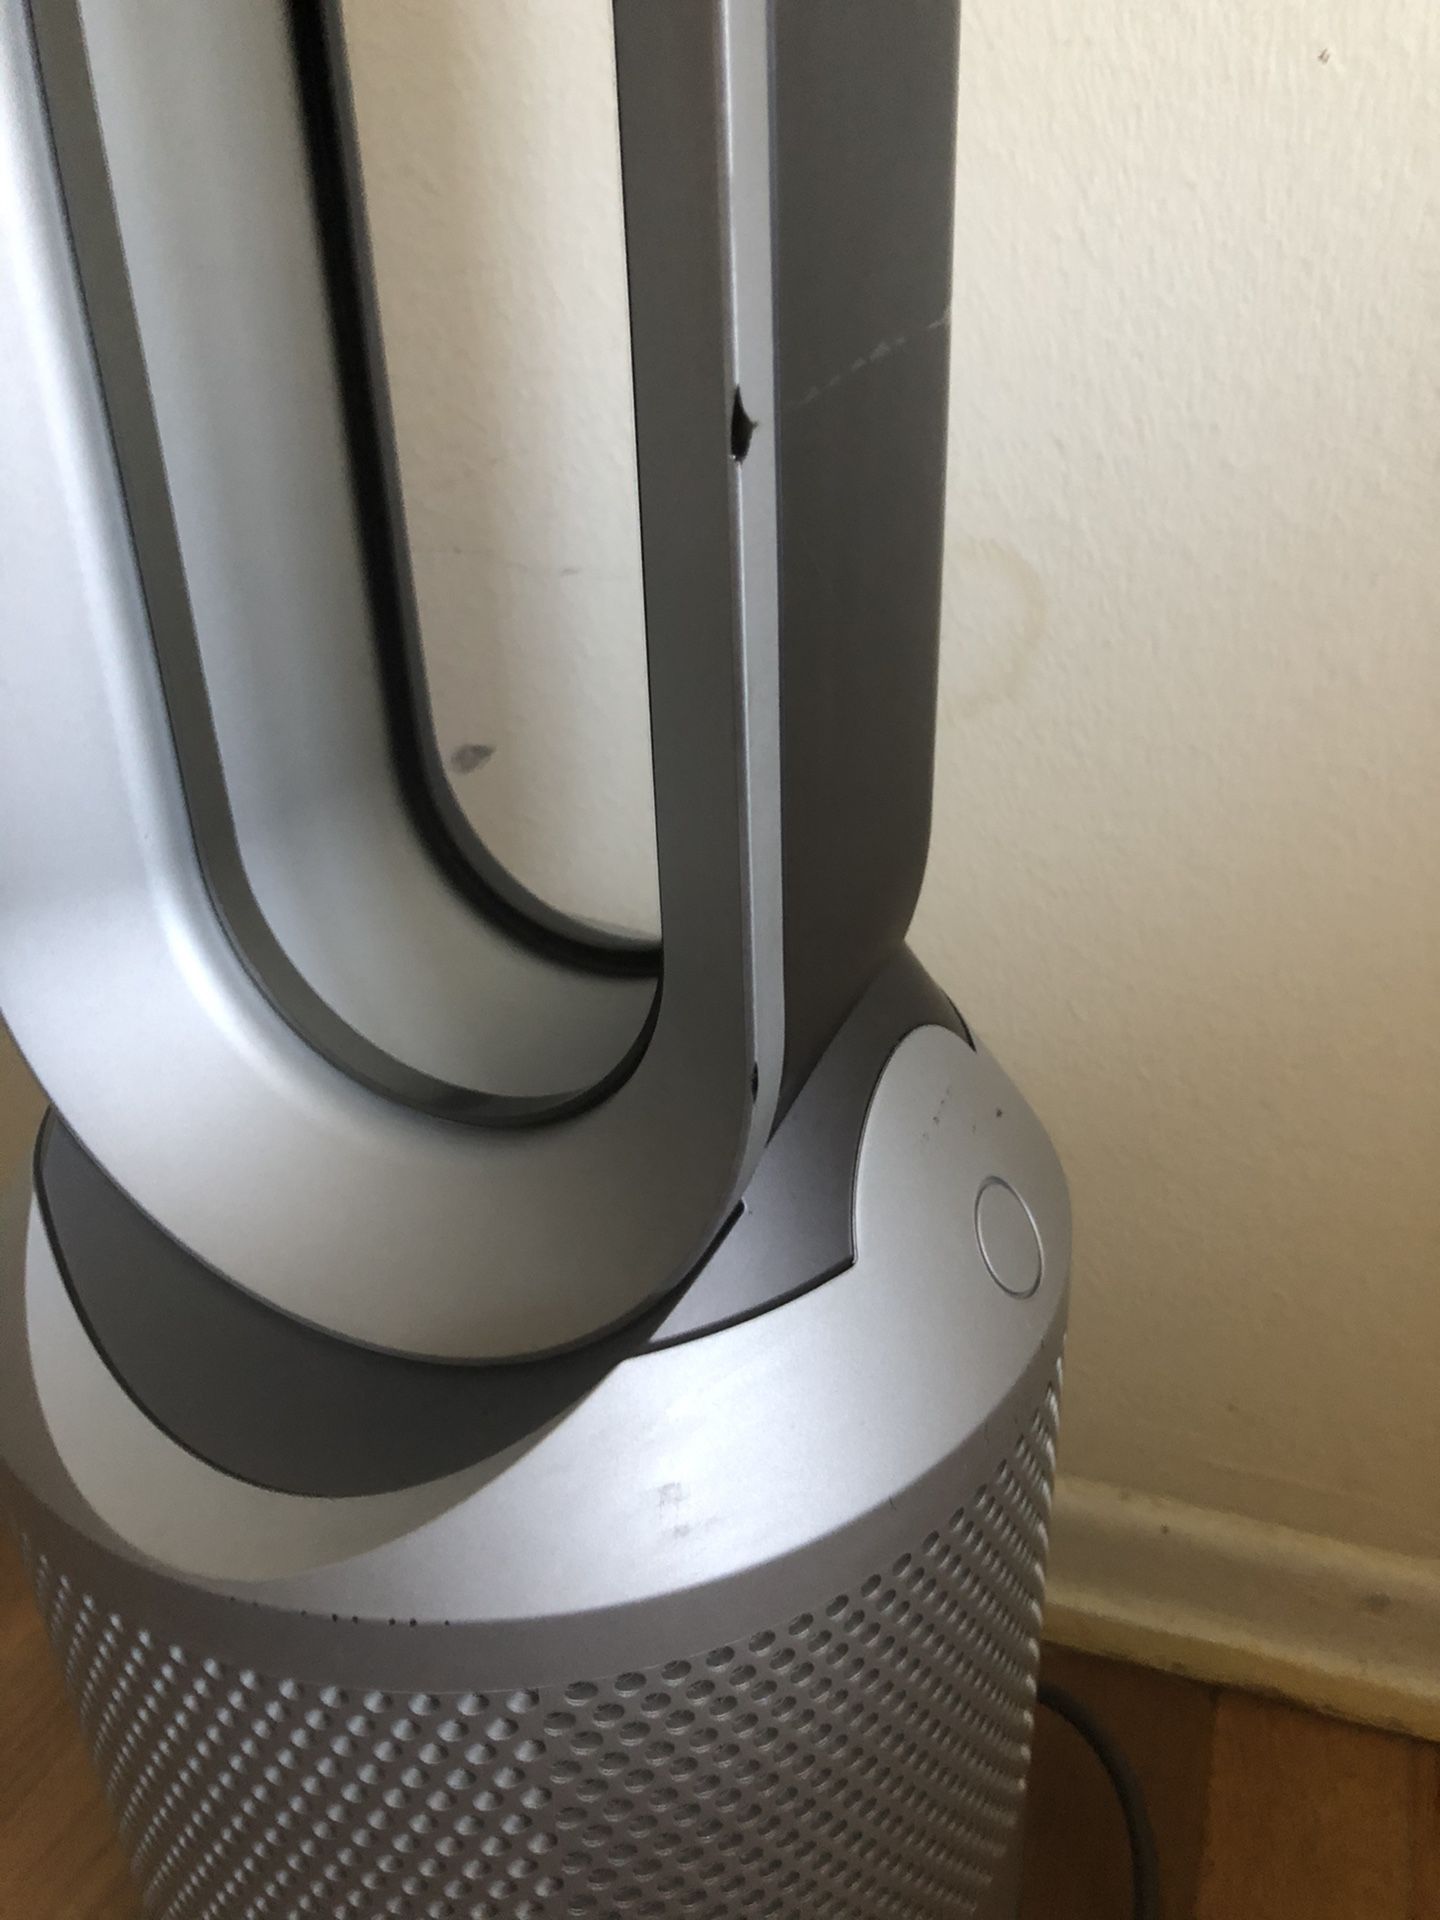 Dyson Pure Hot And Cool HEPA Air Purifier Fan And Heater With Remote, HP01.   Item is in used - good condition .   40 percent of filter life left .   